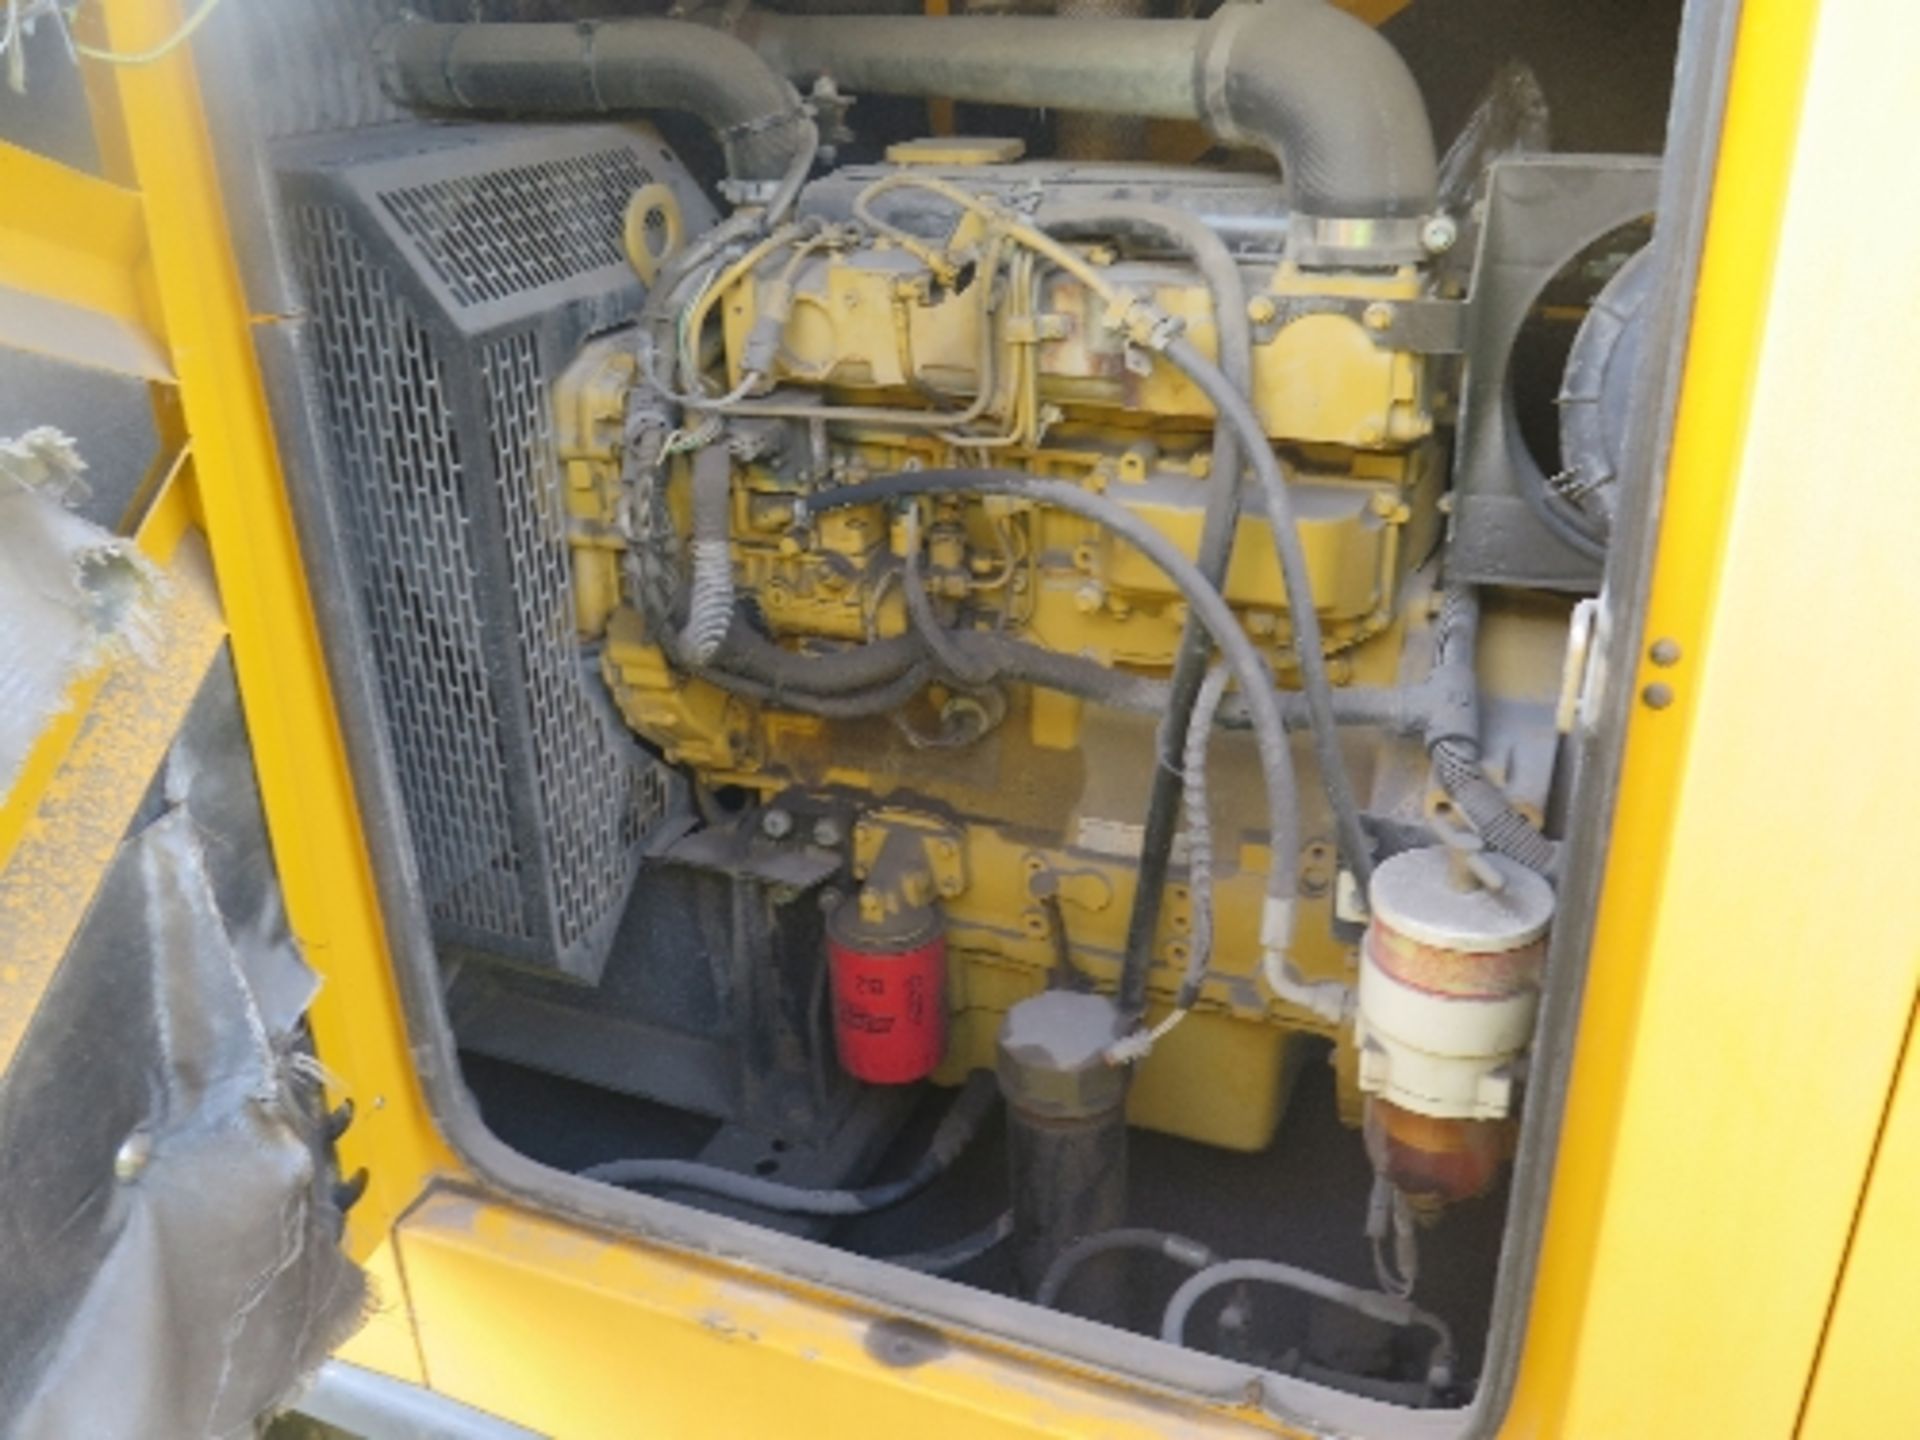 Caterpillar XQE80 generator 5984 hrs 5003853
PERKINS POWER - RUNS AND MAKES POWER
ALL LOTS are - Image 4 of 7